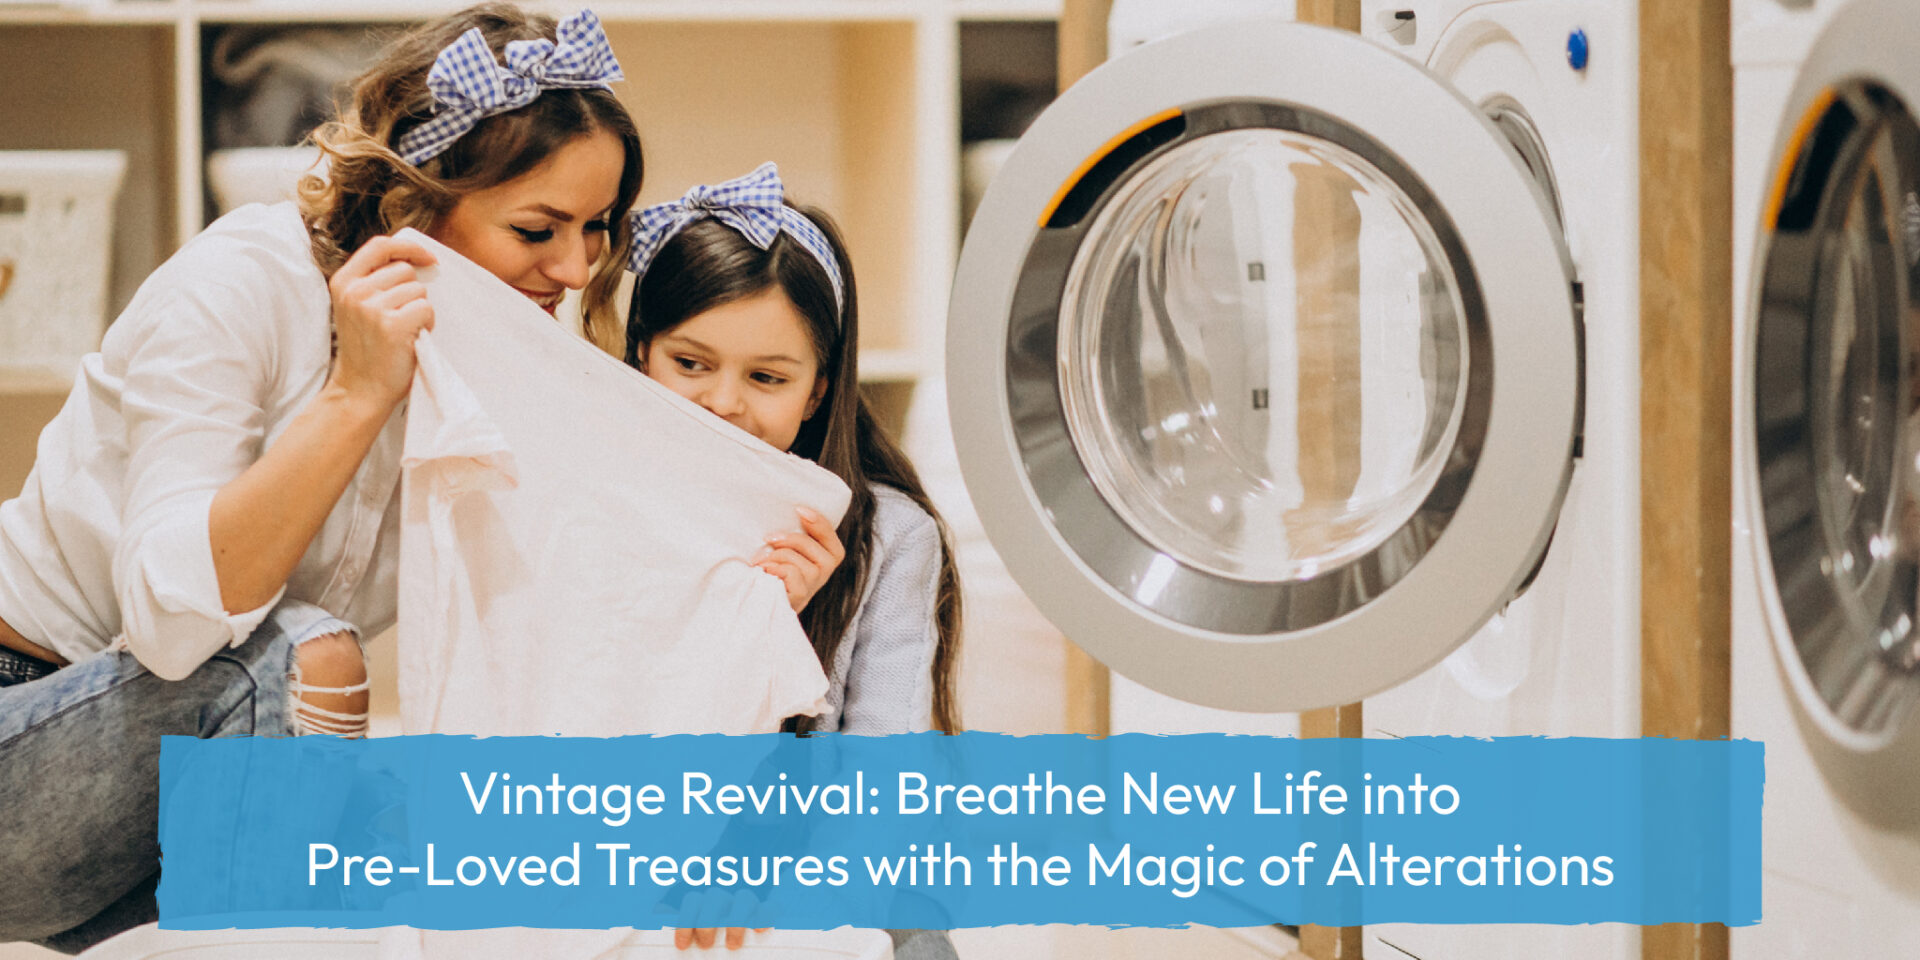 Vintage Revival Breathe New Life into Pre-Loved Treasures with the Magic of Alterations